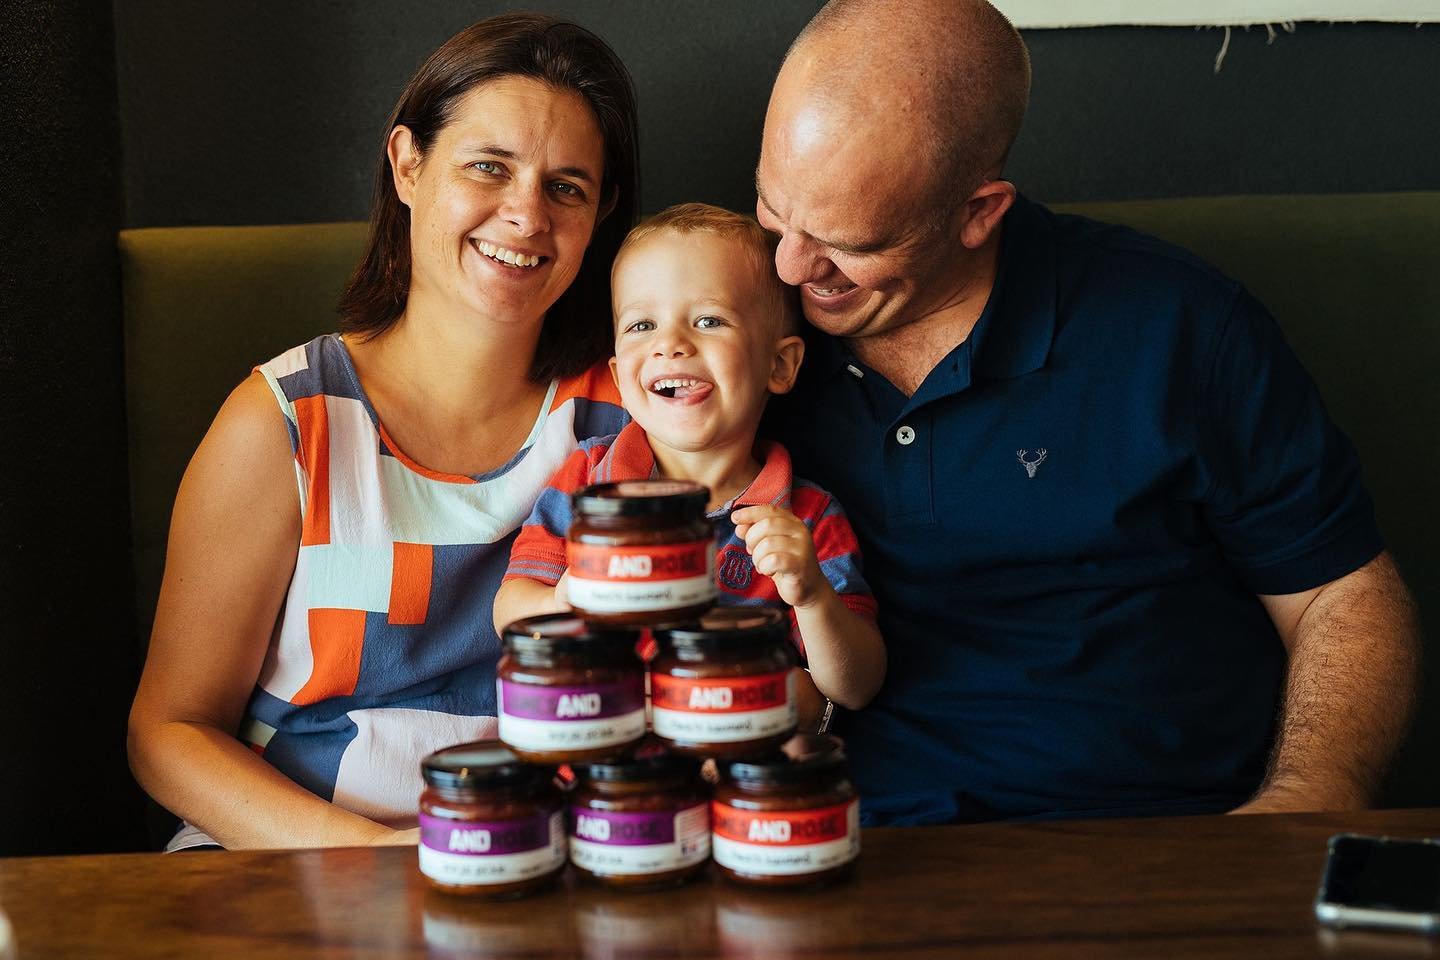 Planning on making Mum brekky in bed this Mother&rsquo;s Day? Why not add some Brinjal Pickle into your scrambled eggs! 
Locally made, James &amp; Rose&rsquo;s family recipe is a pantry staple. It&rsquo;s seriously delicious!
Come by, grab a jar and 